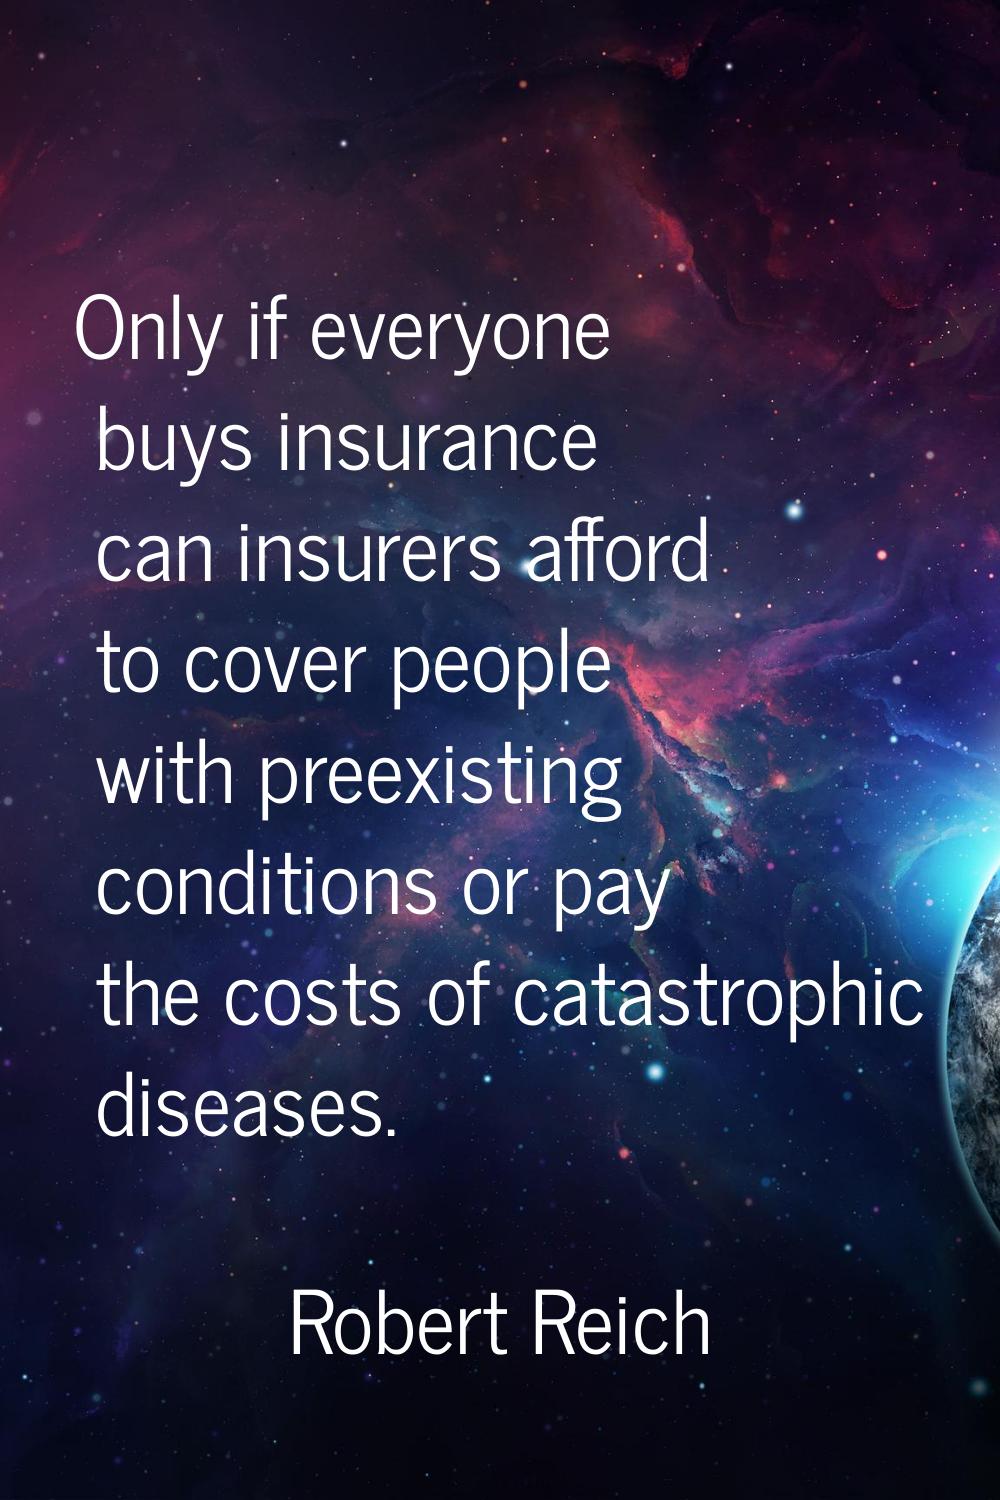 Only if everyone buys insurance can insurers afford to cover people with preexisting conditions or 